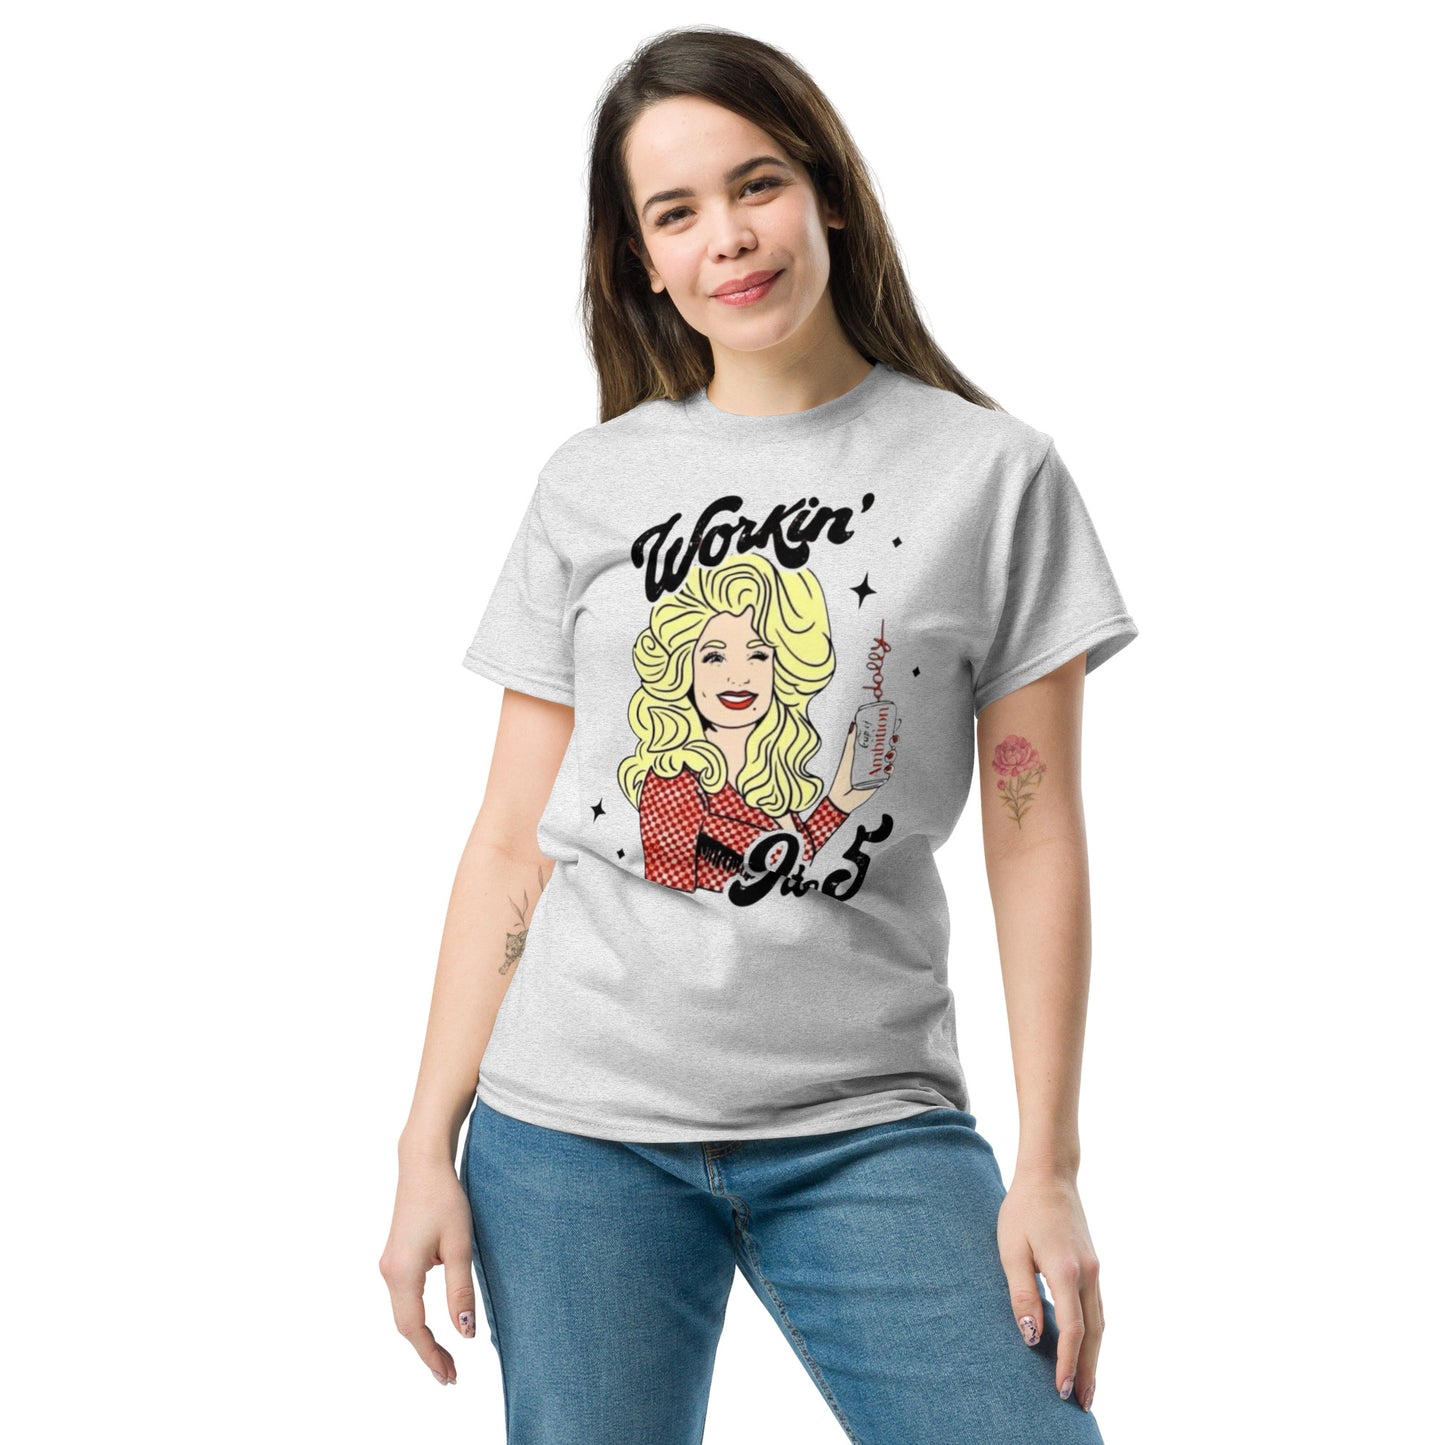 Workin' 9 to 5 - Inspired by Dolly Parton | Classic Country Tees - Classic Country Tees